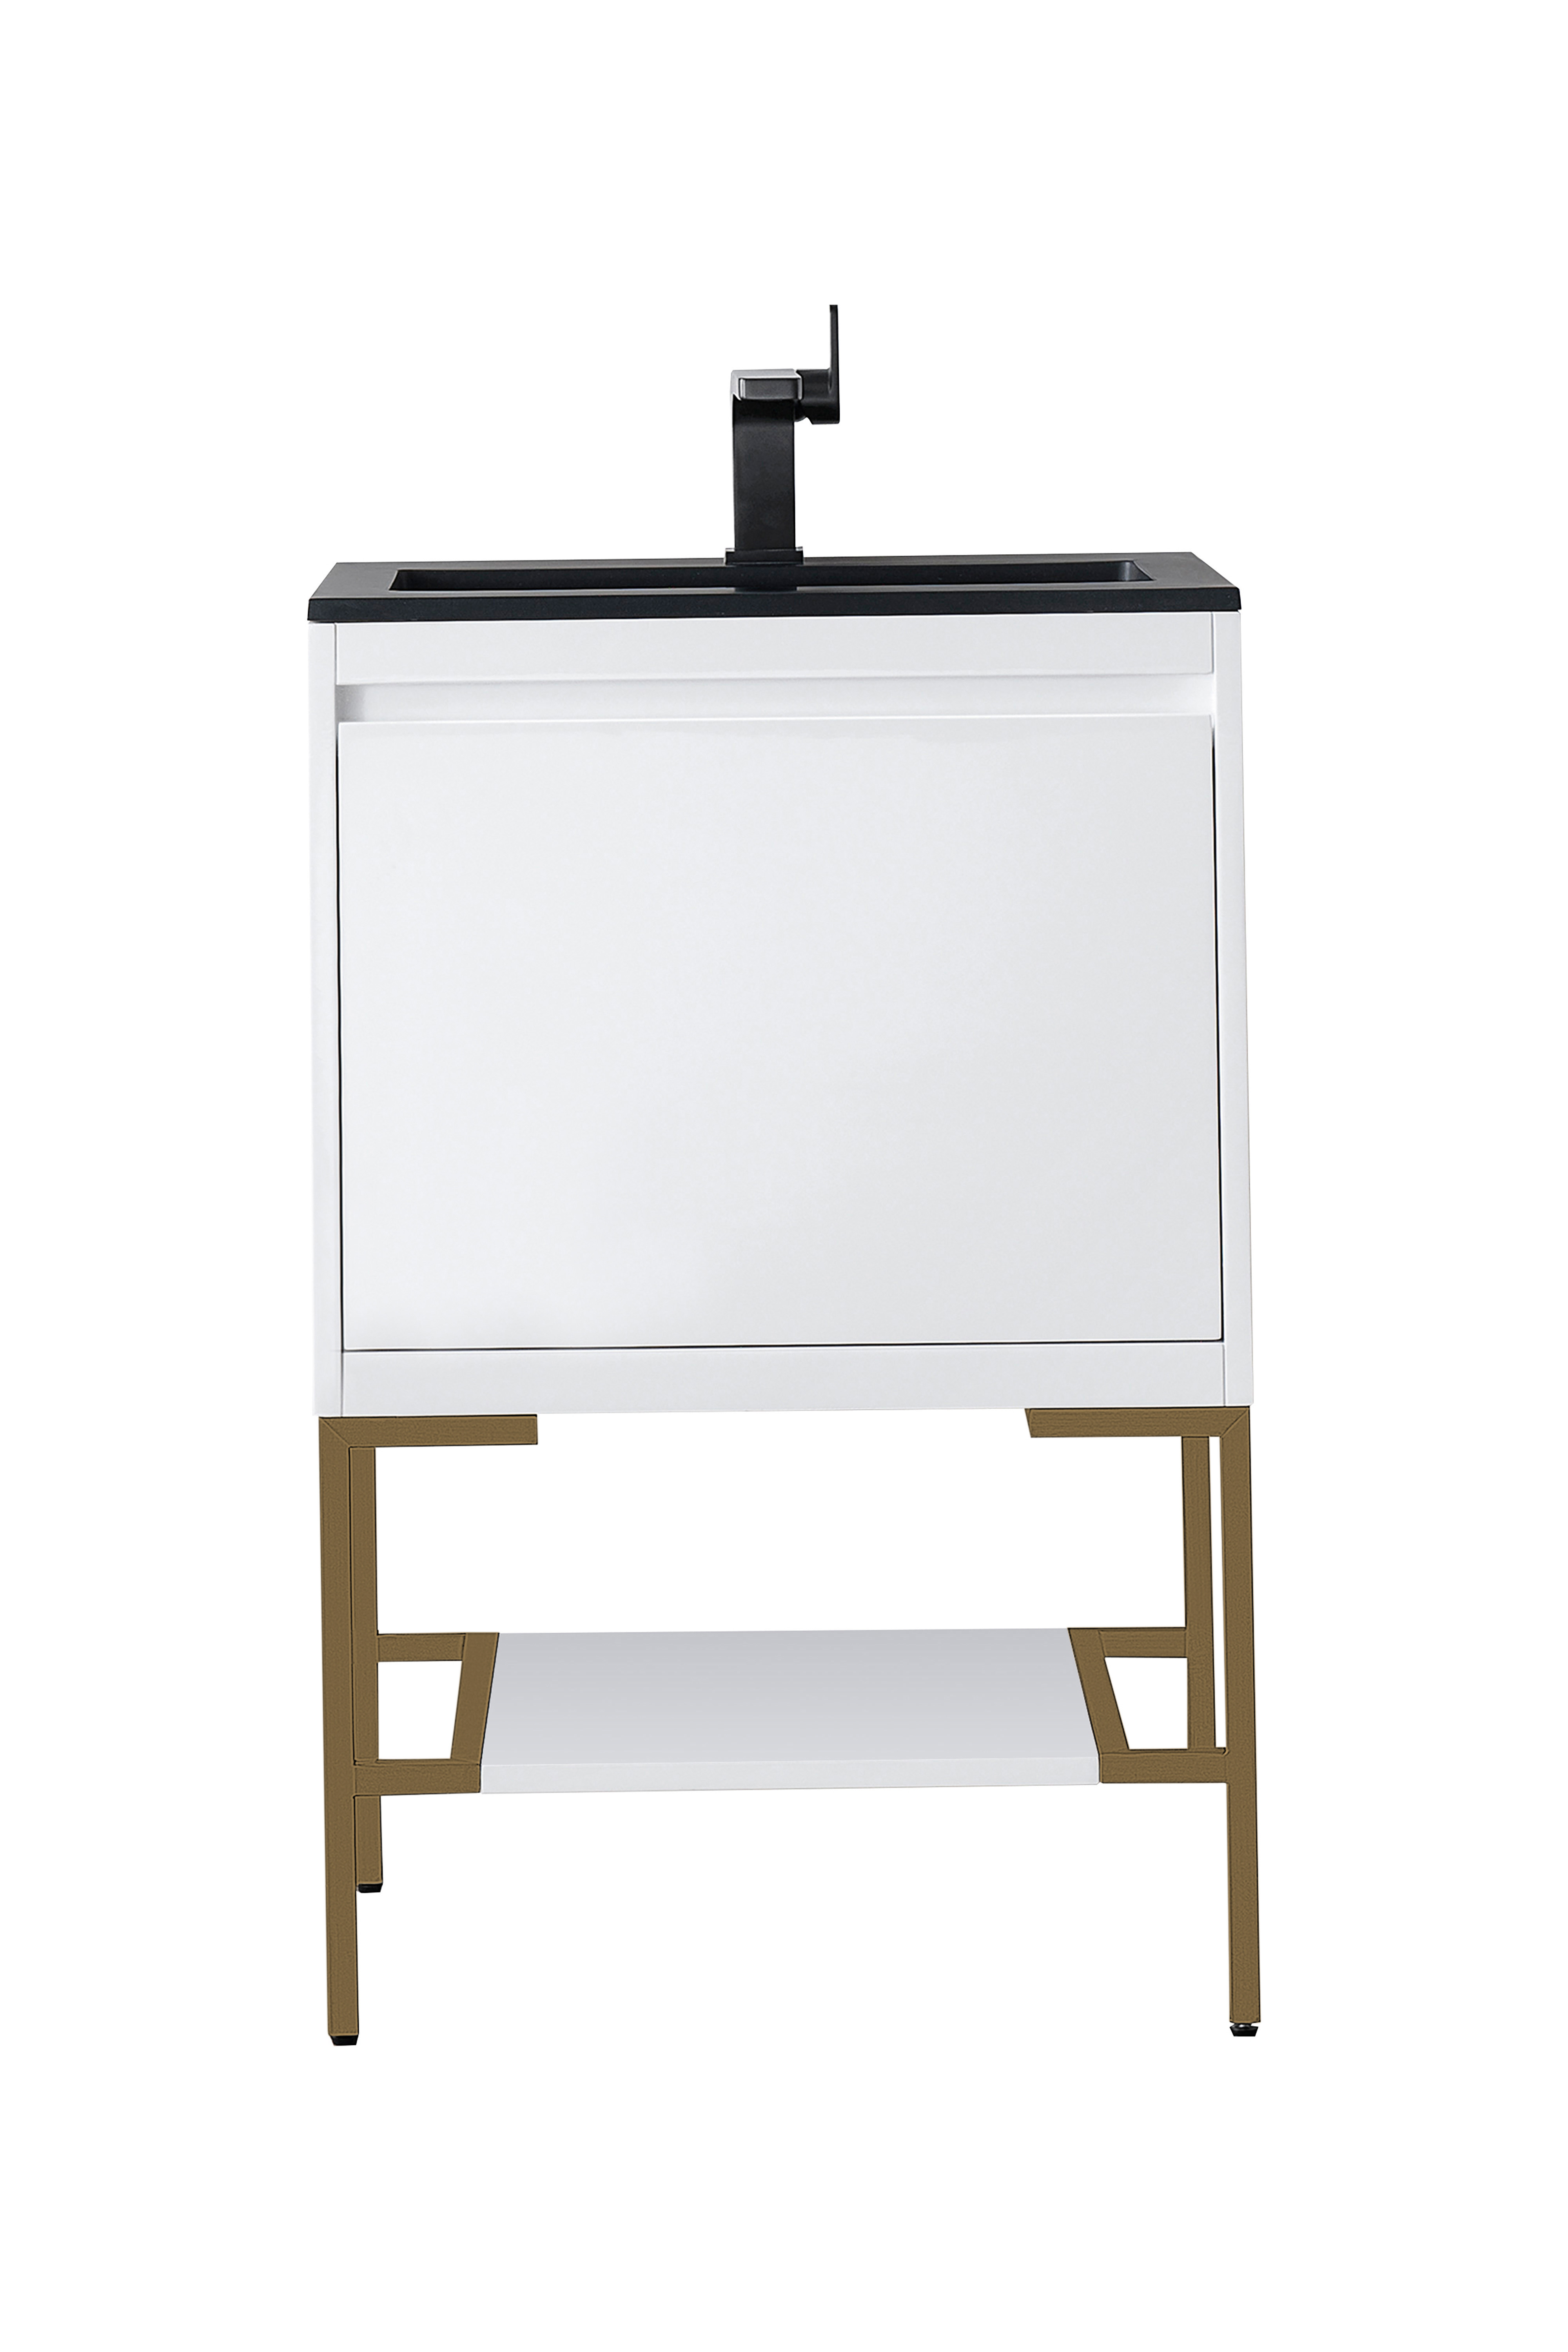 James Martin 801V23.6GWRGDCHB Milan 23.6" Single Vanity Cabinet, Glossy White, Radiant Gold w/Charcoal Black Composite Top